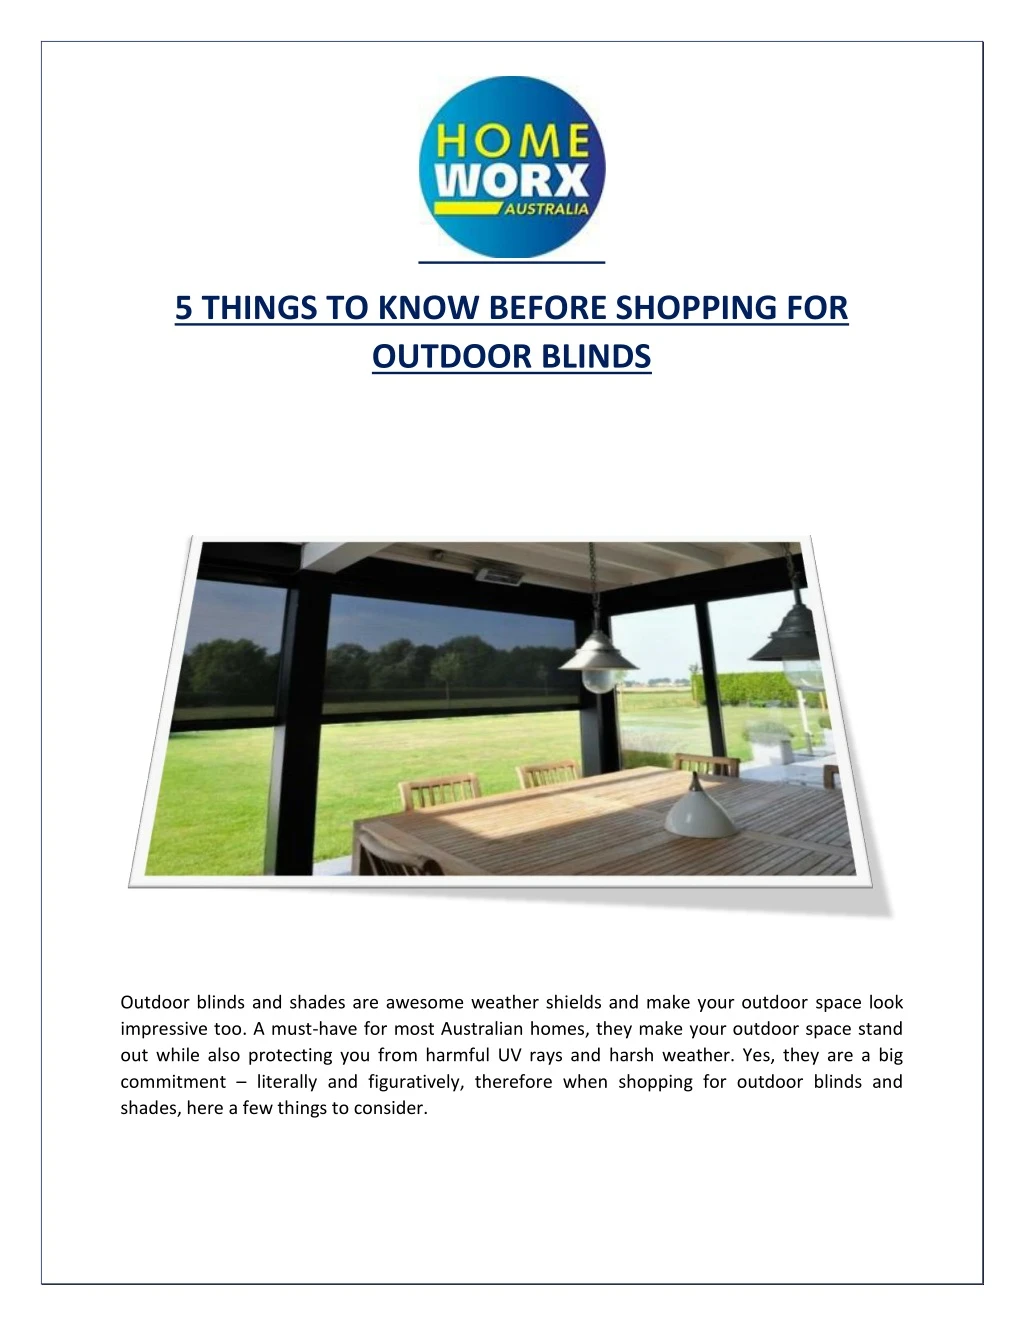 5 things to know before shopping for outdoor